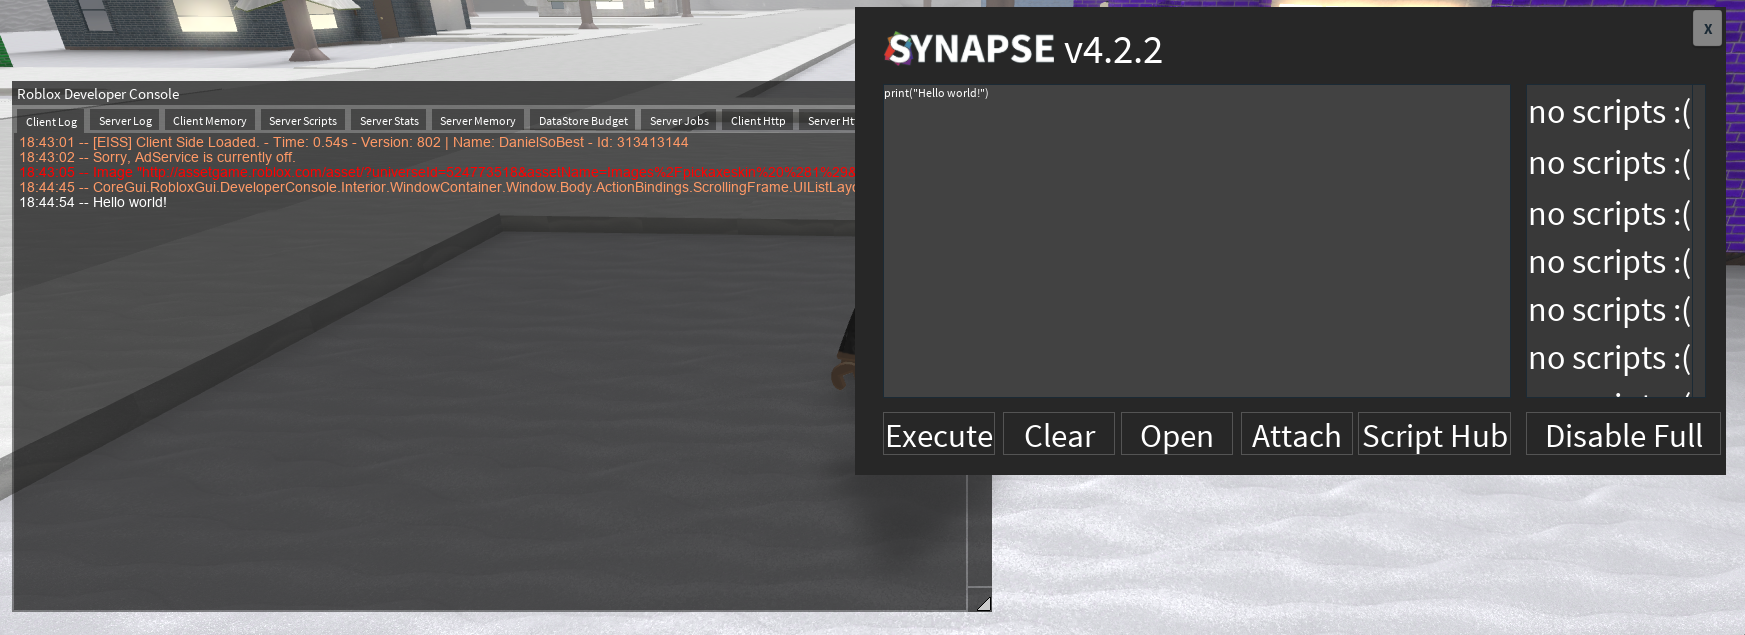 Synapse Roblox Free Download 2020